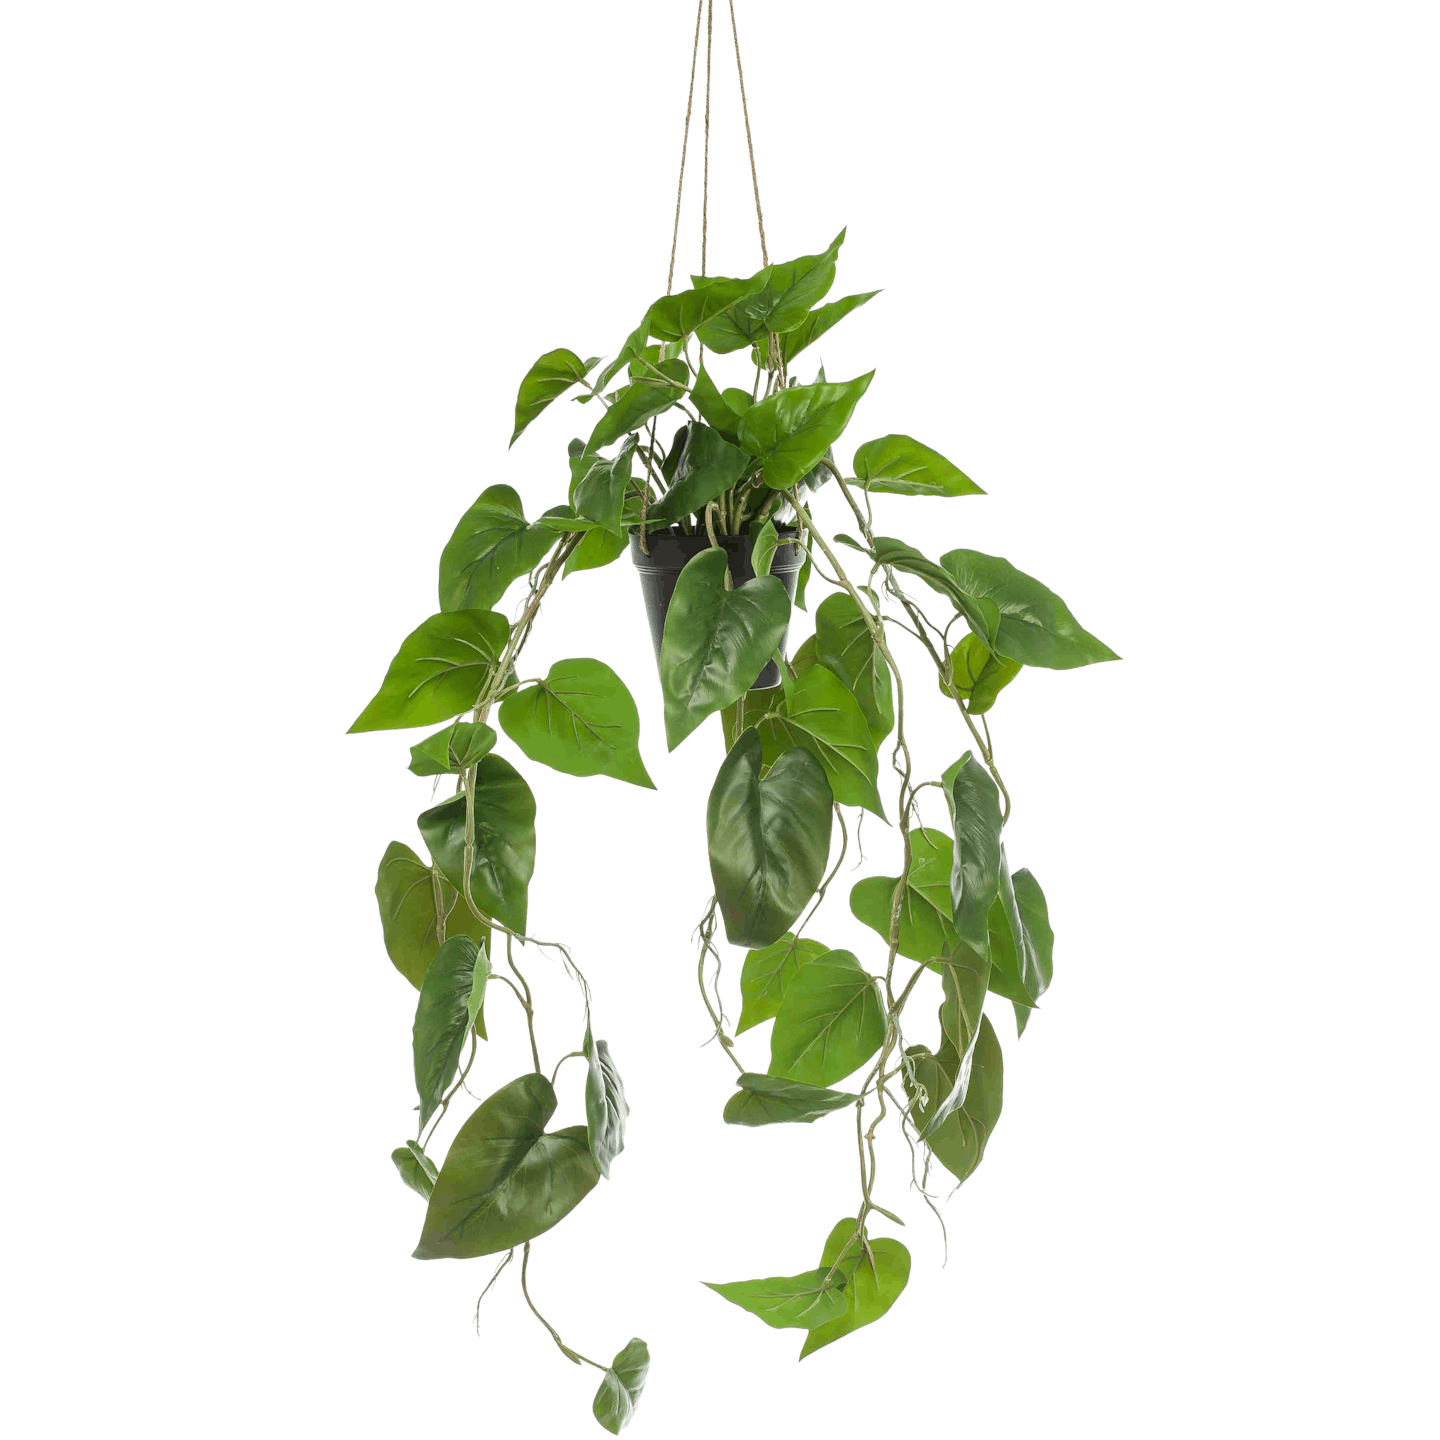 Hanging artificial philodendron scandens trailing plant by Blooming Artificial